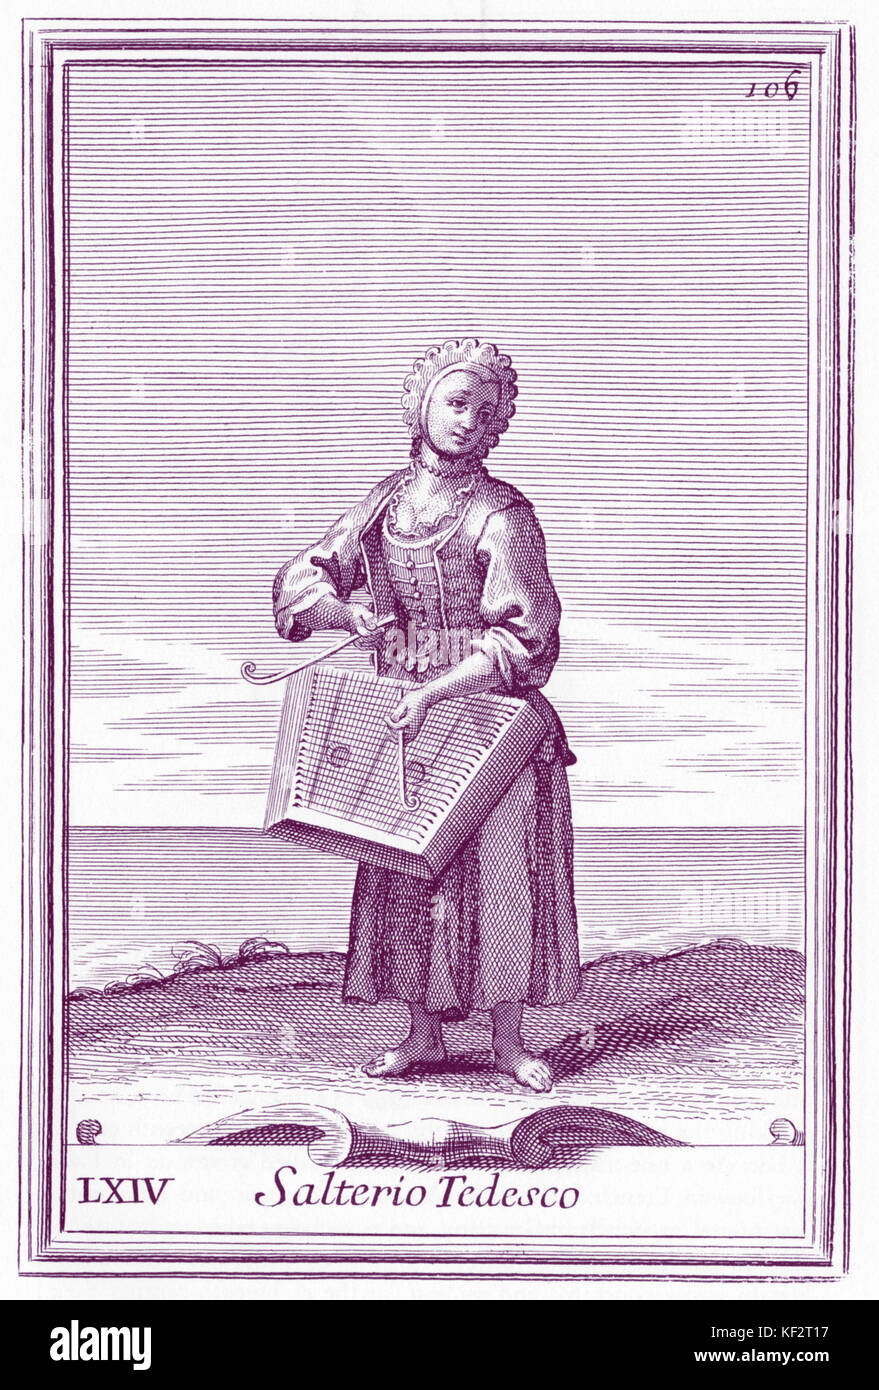 Dulcimer musician Salterio Tedesco (German psaltery) from Bonanni's 'Gabinetto Armonico' published in 1723.  Engraving by Arnold van Westerhout.  Illustration 64 Stock Photo